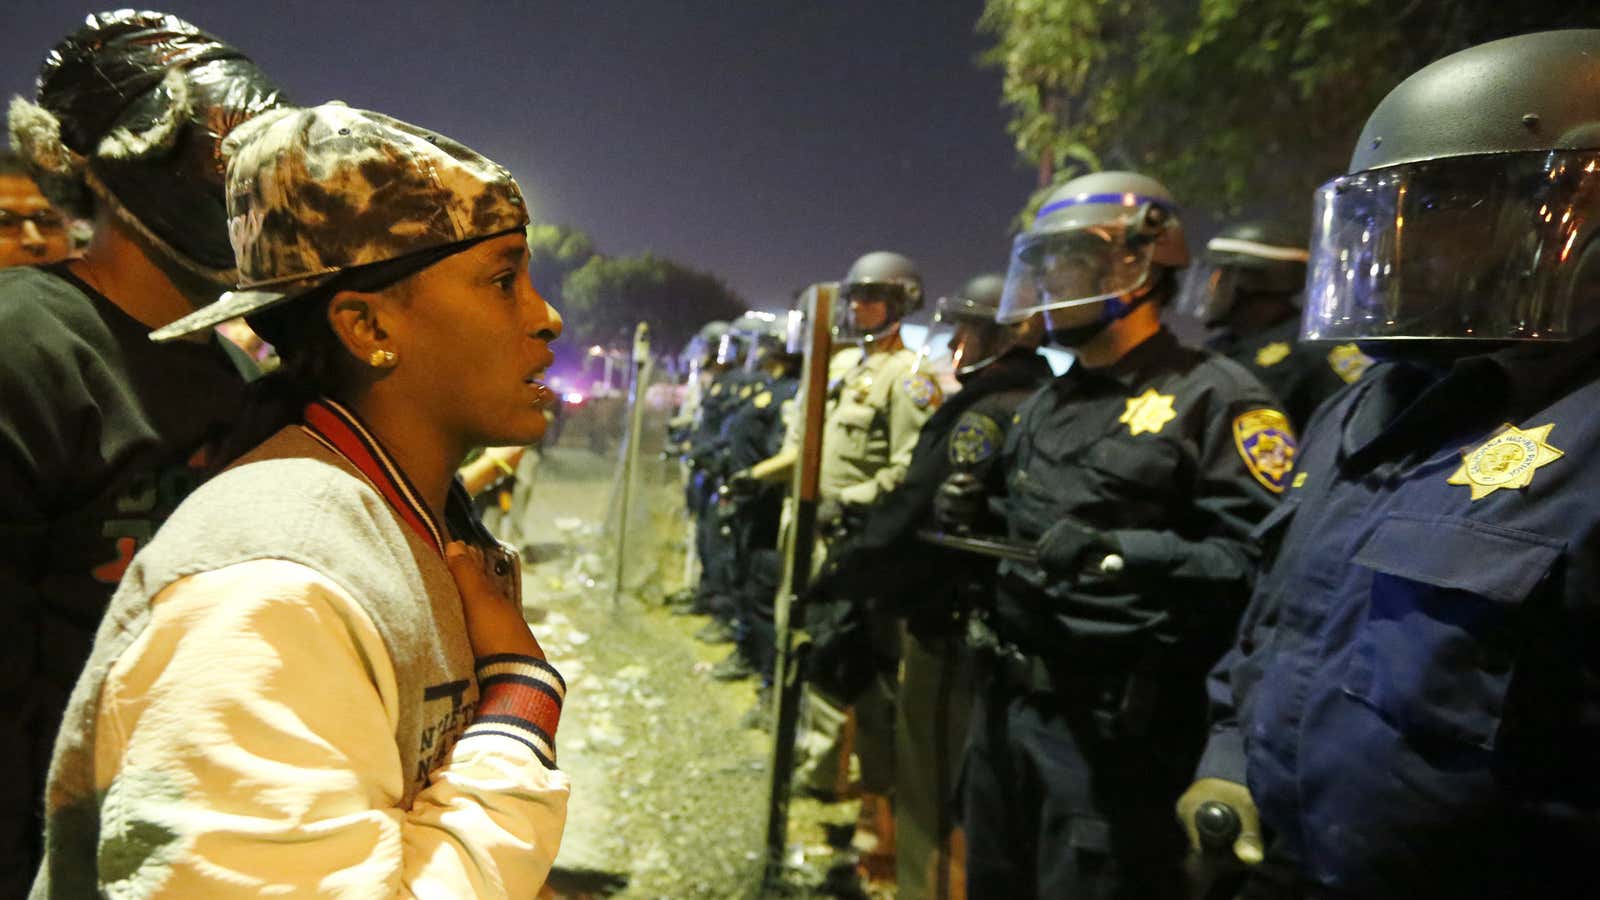 LAPD officers face protestors following the grand jury decision in the shooting of Michael Brown in Ferguson, Missouri.